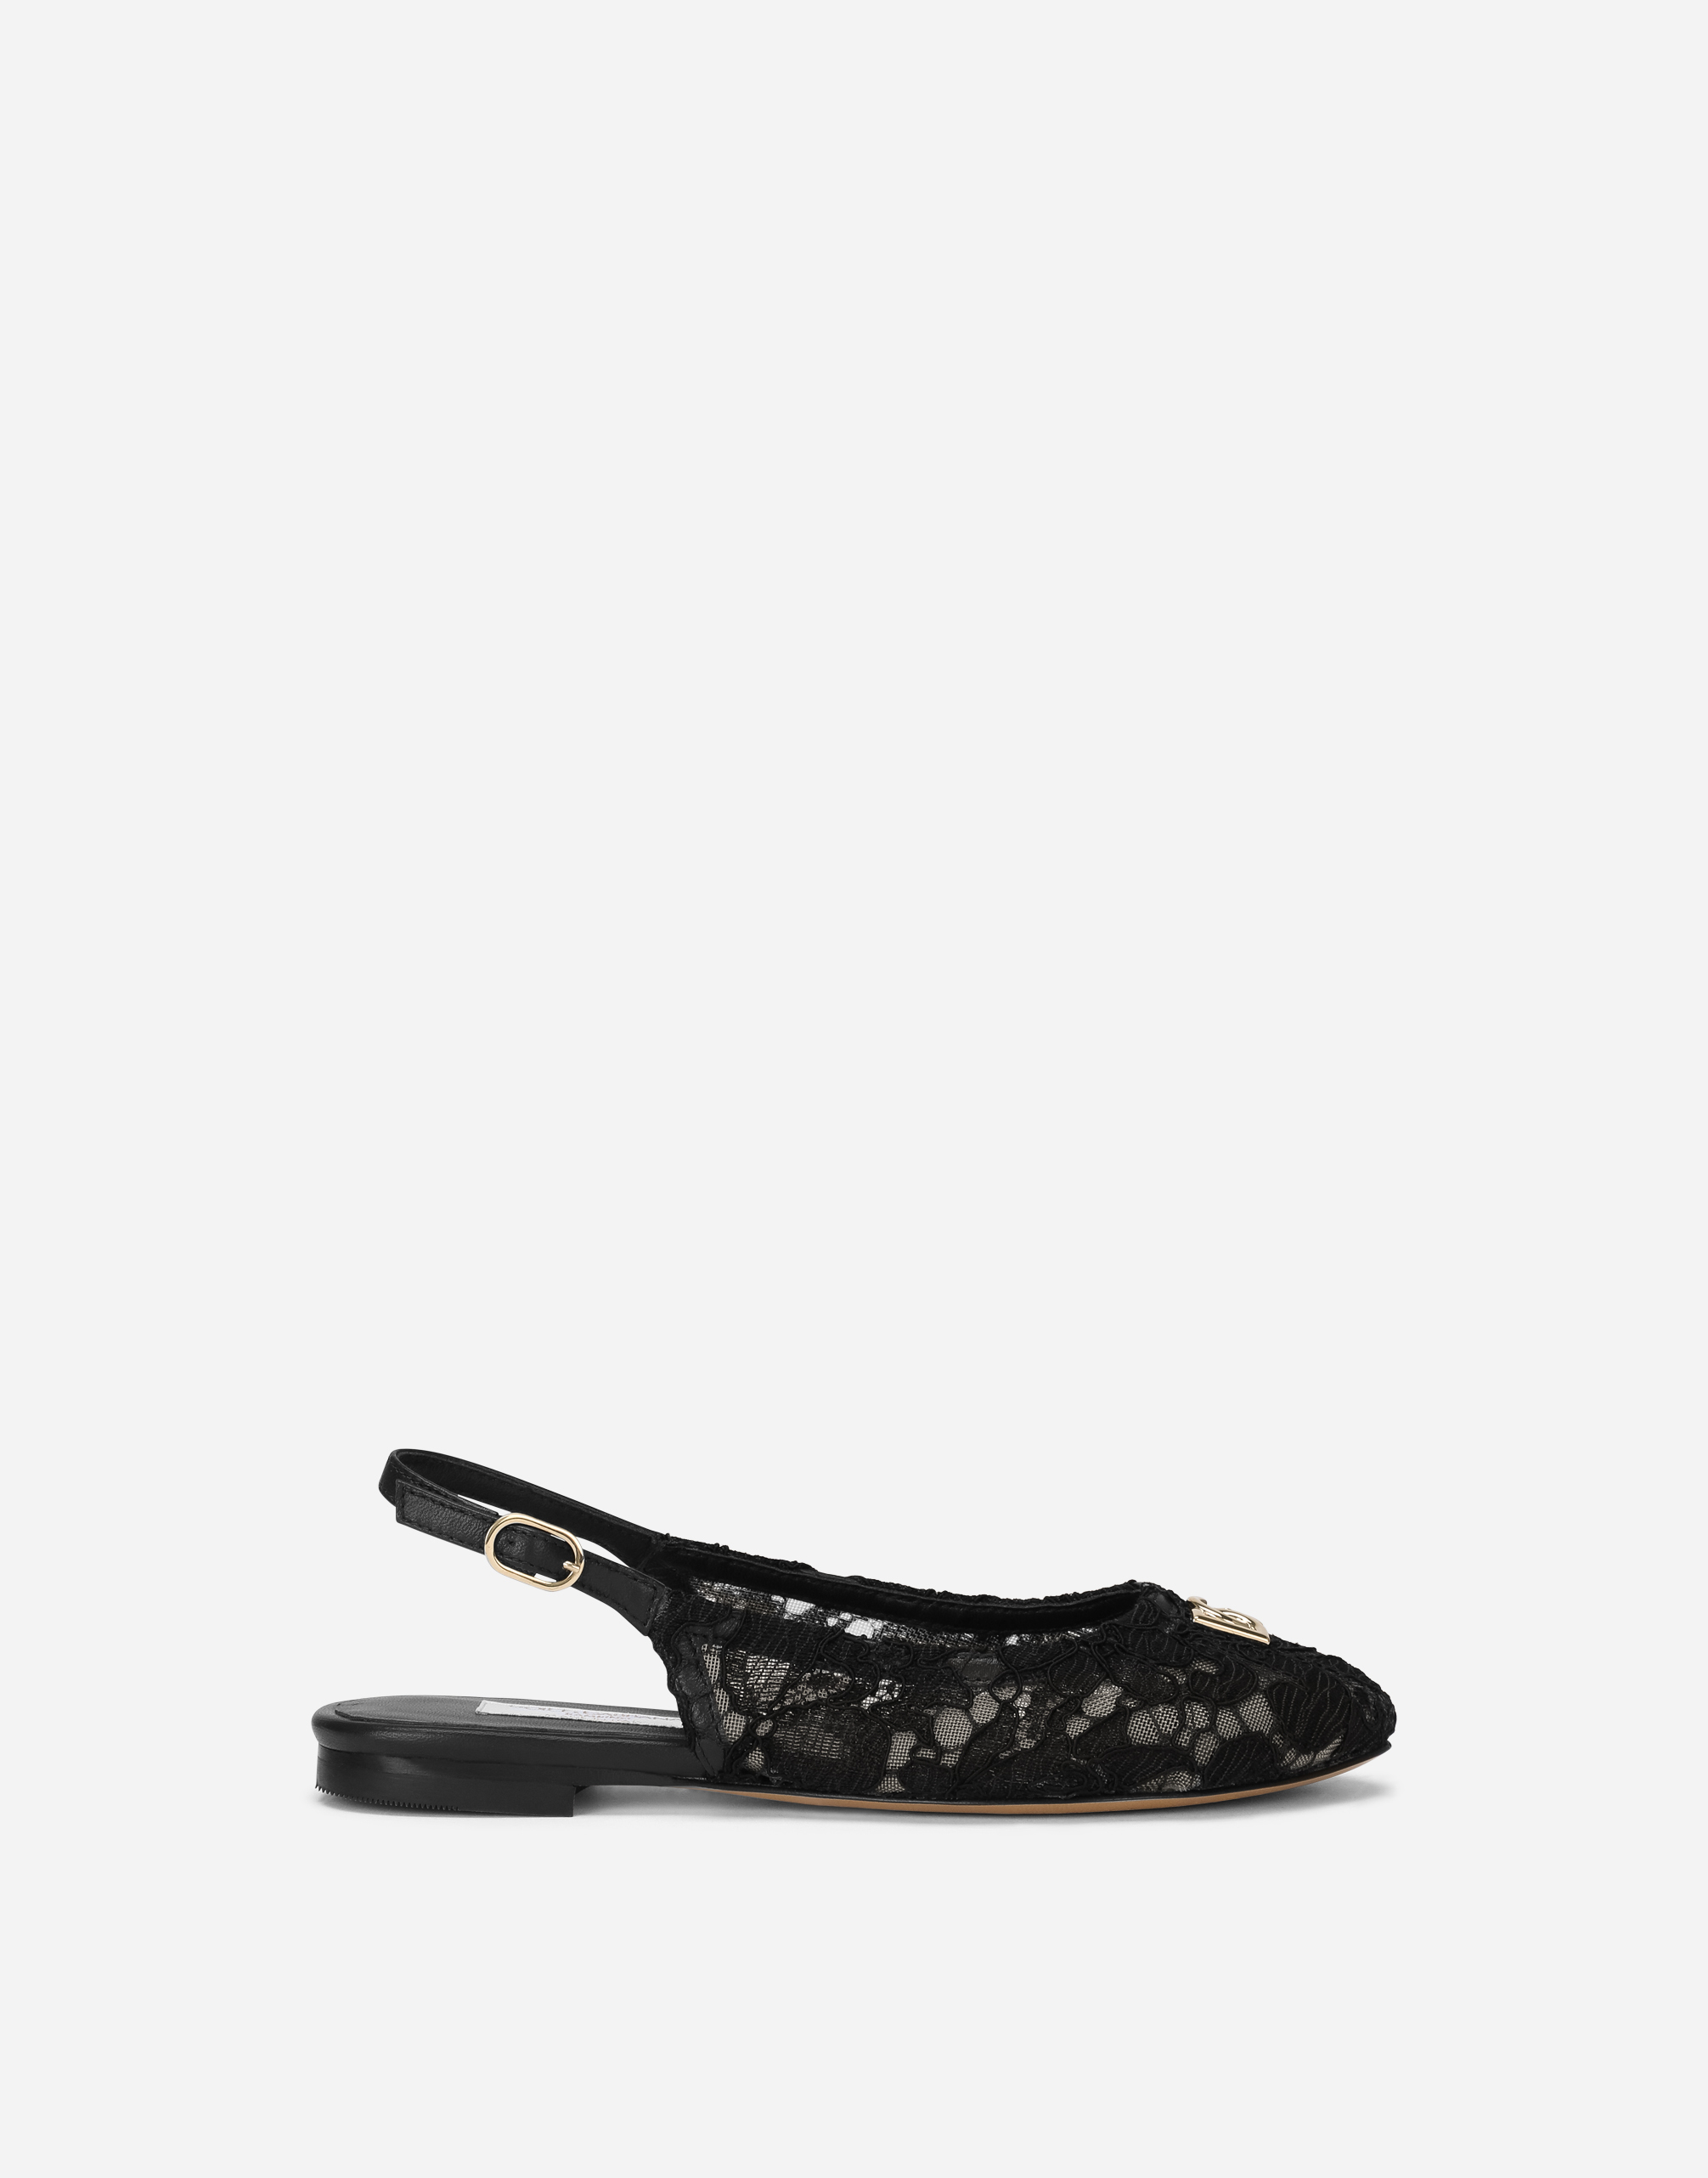 Cordonetto lace slingbacks with DG logo in Black